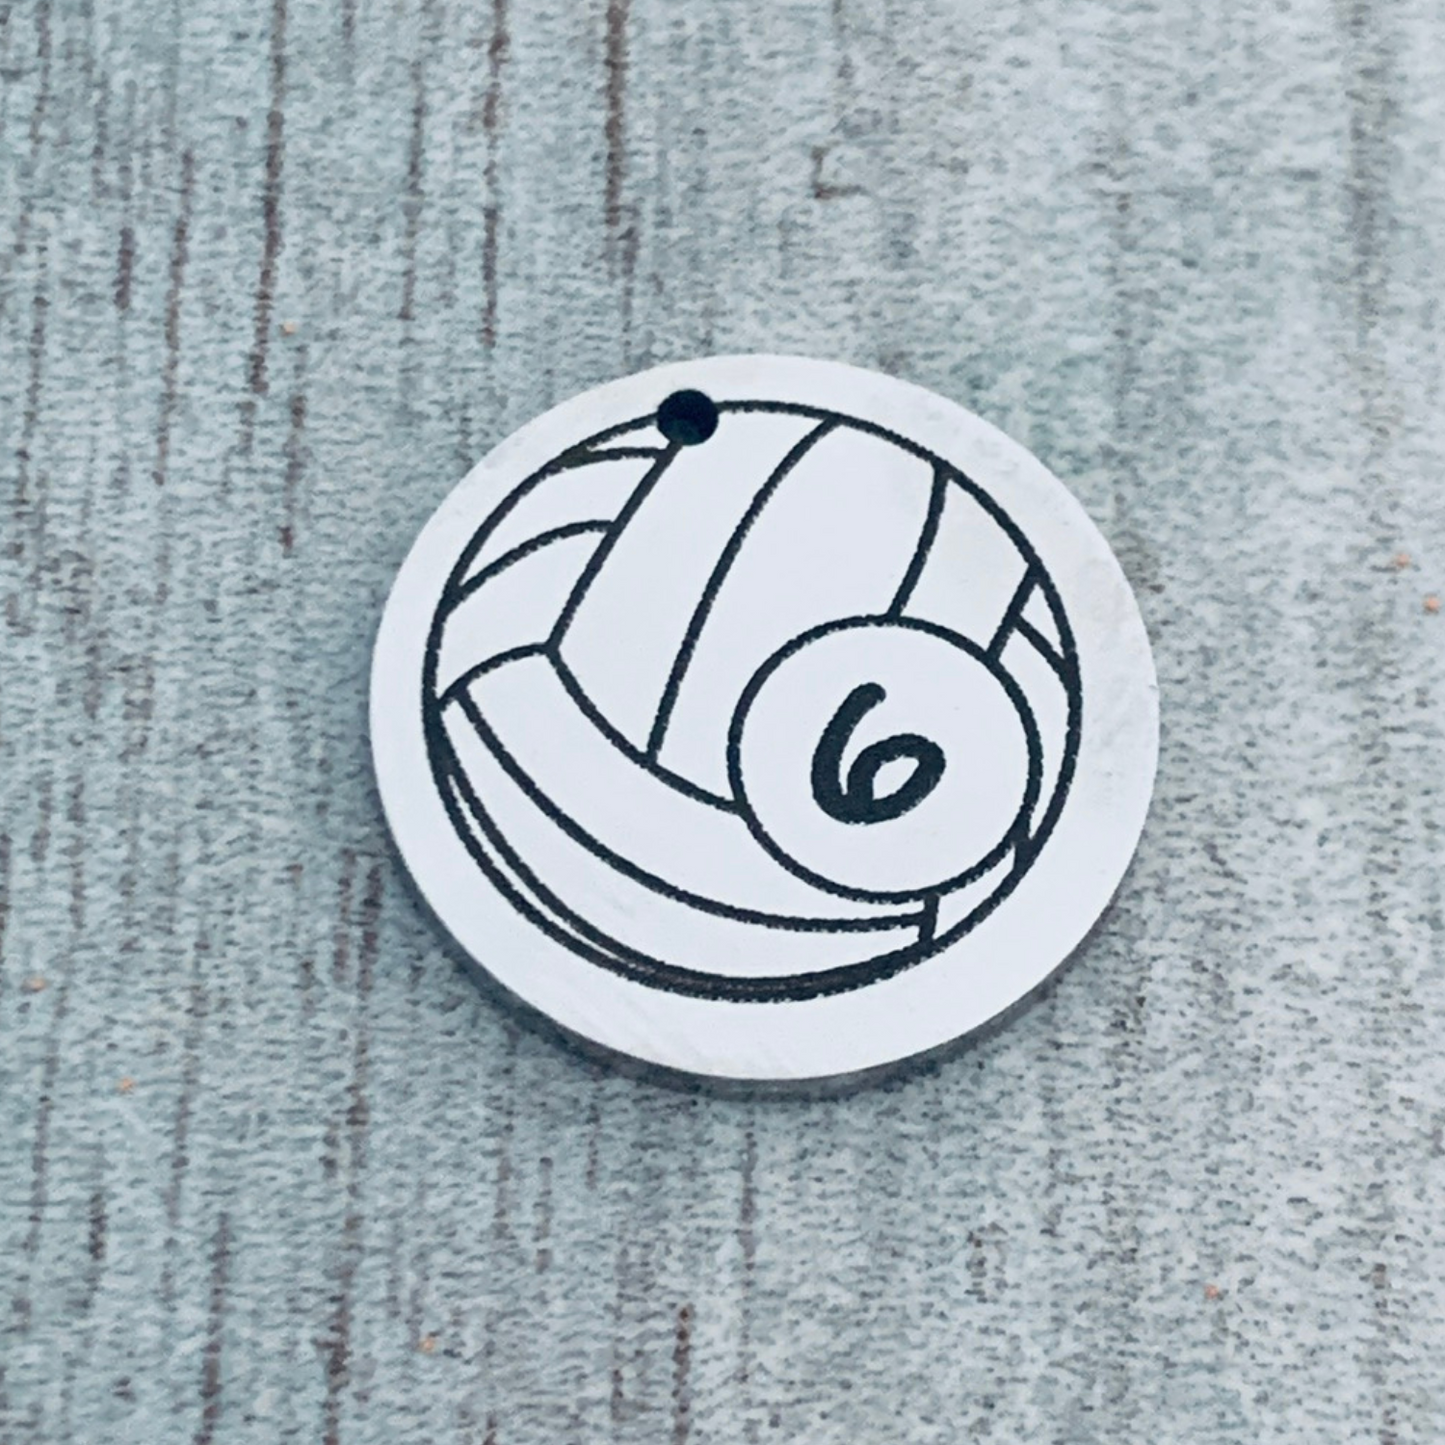 Volleyball Engraved Charm